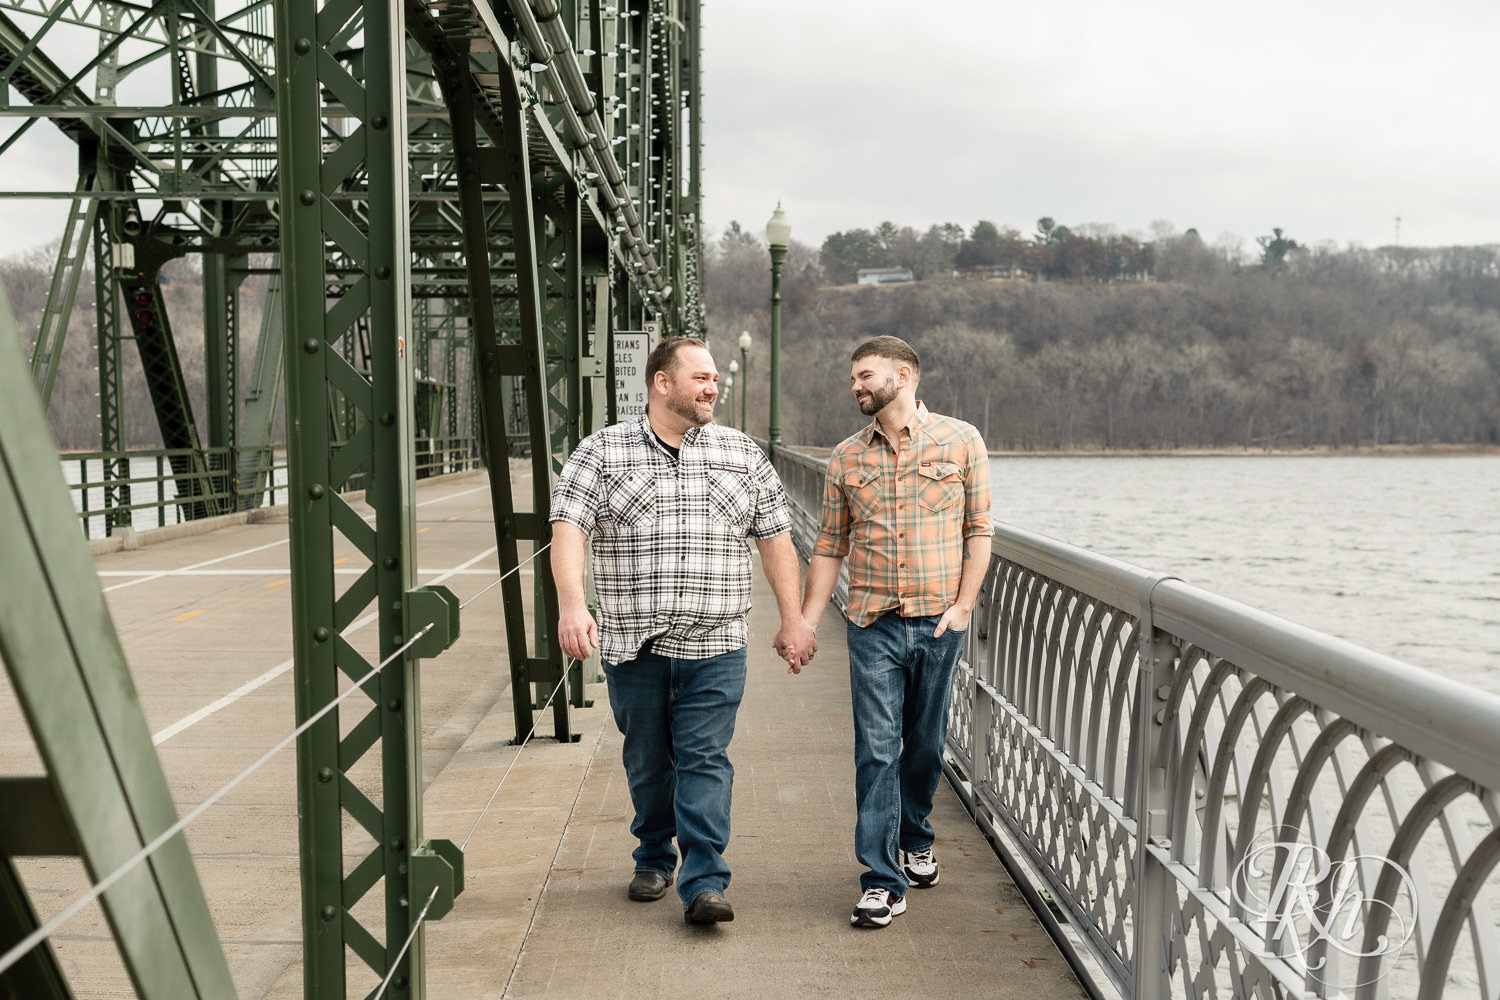 Two men in flannels and jeans walk in on the bridge during engagement photography in Stillwater, Minnesota.